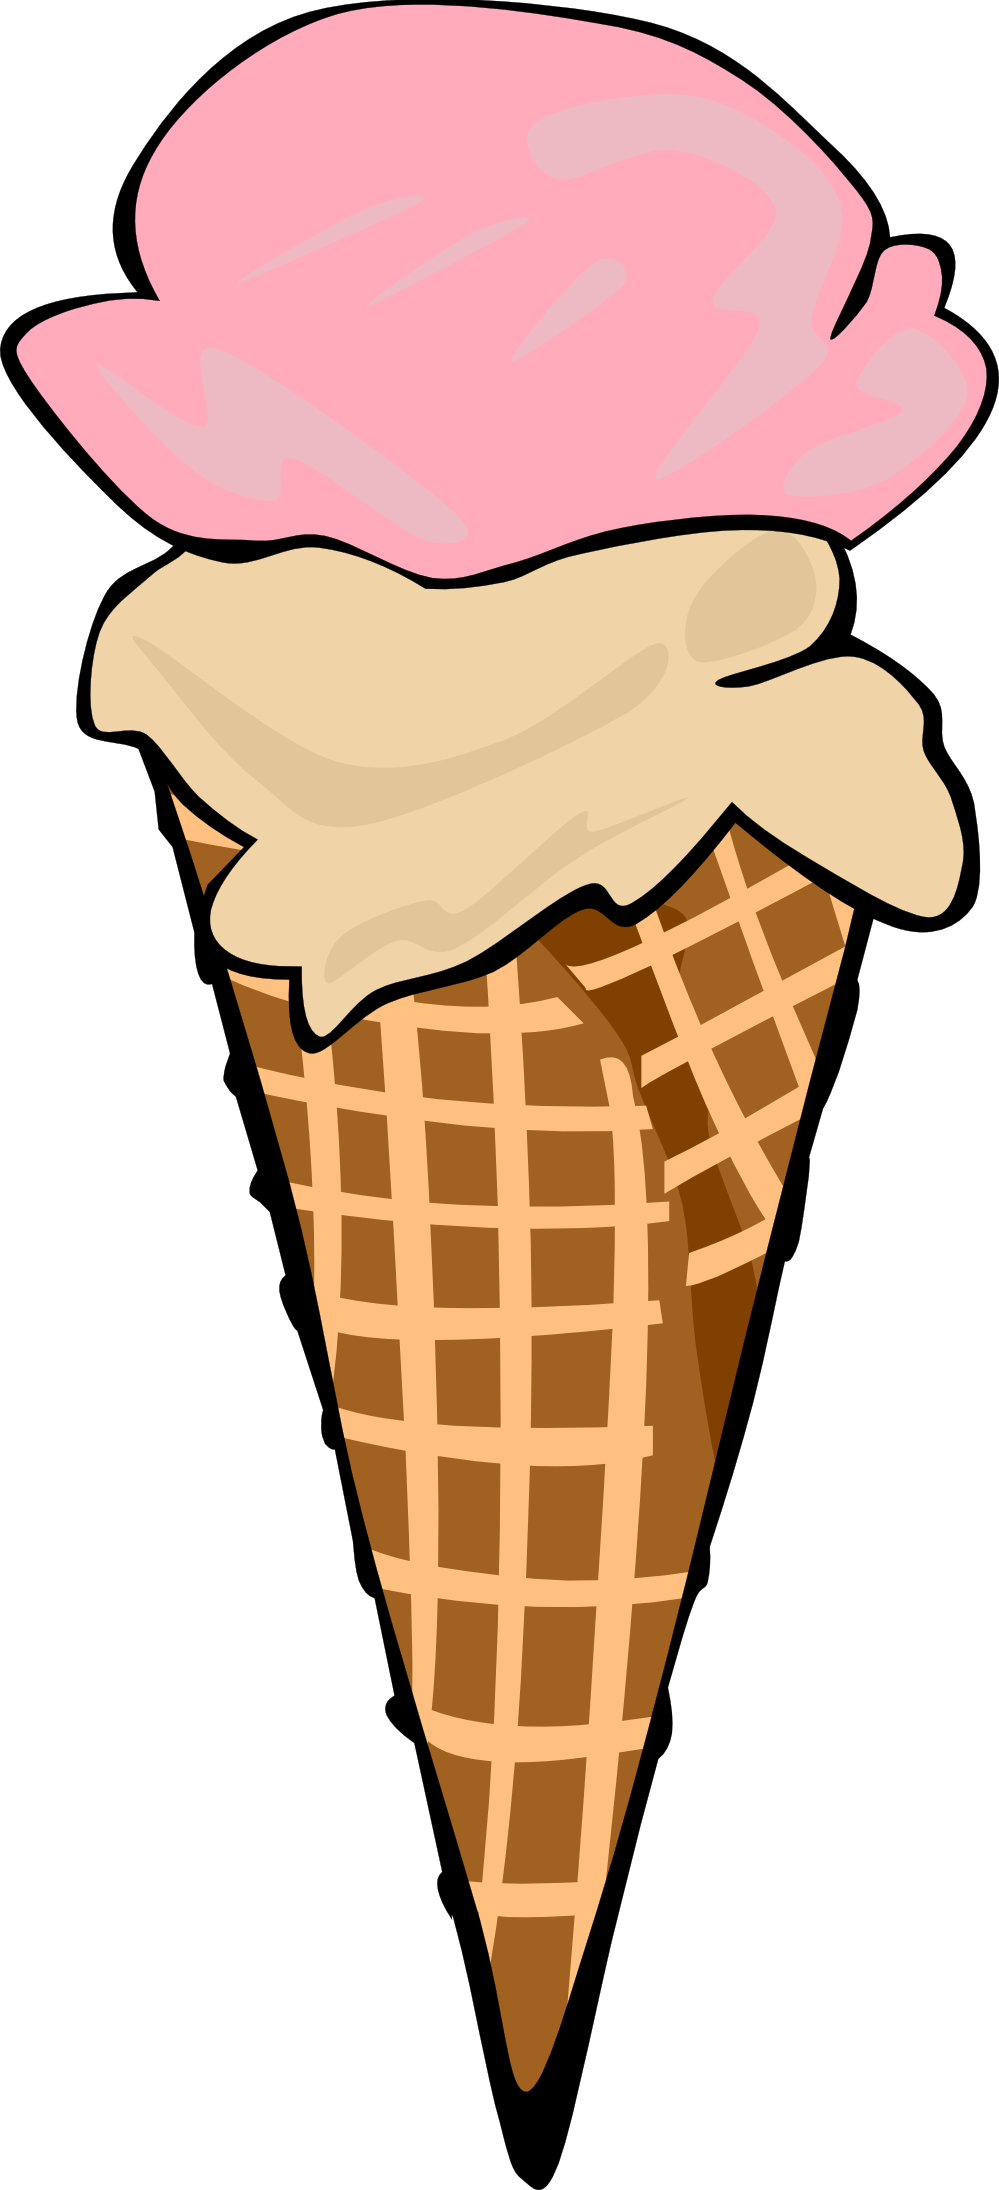 Images For > Ice Cream Cone Clip Art Png